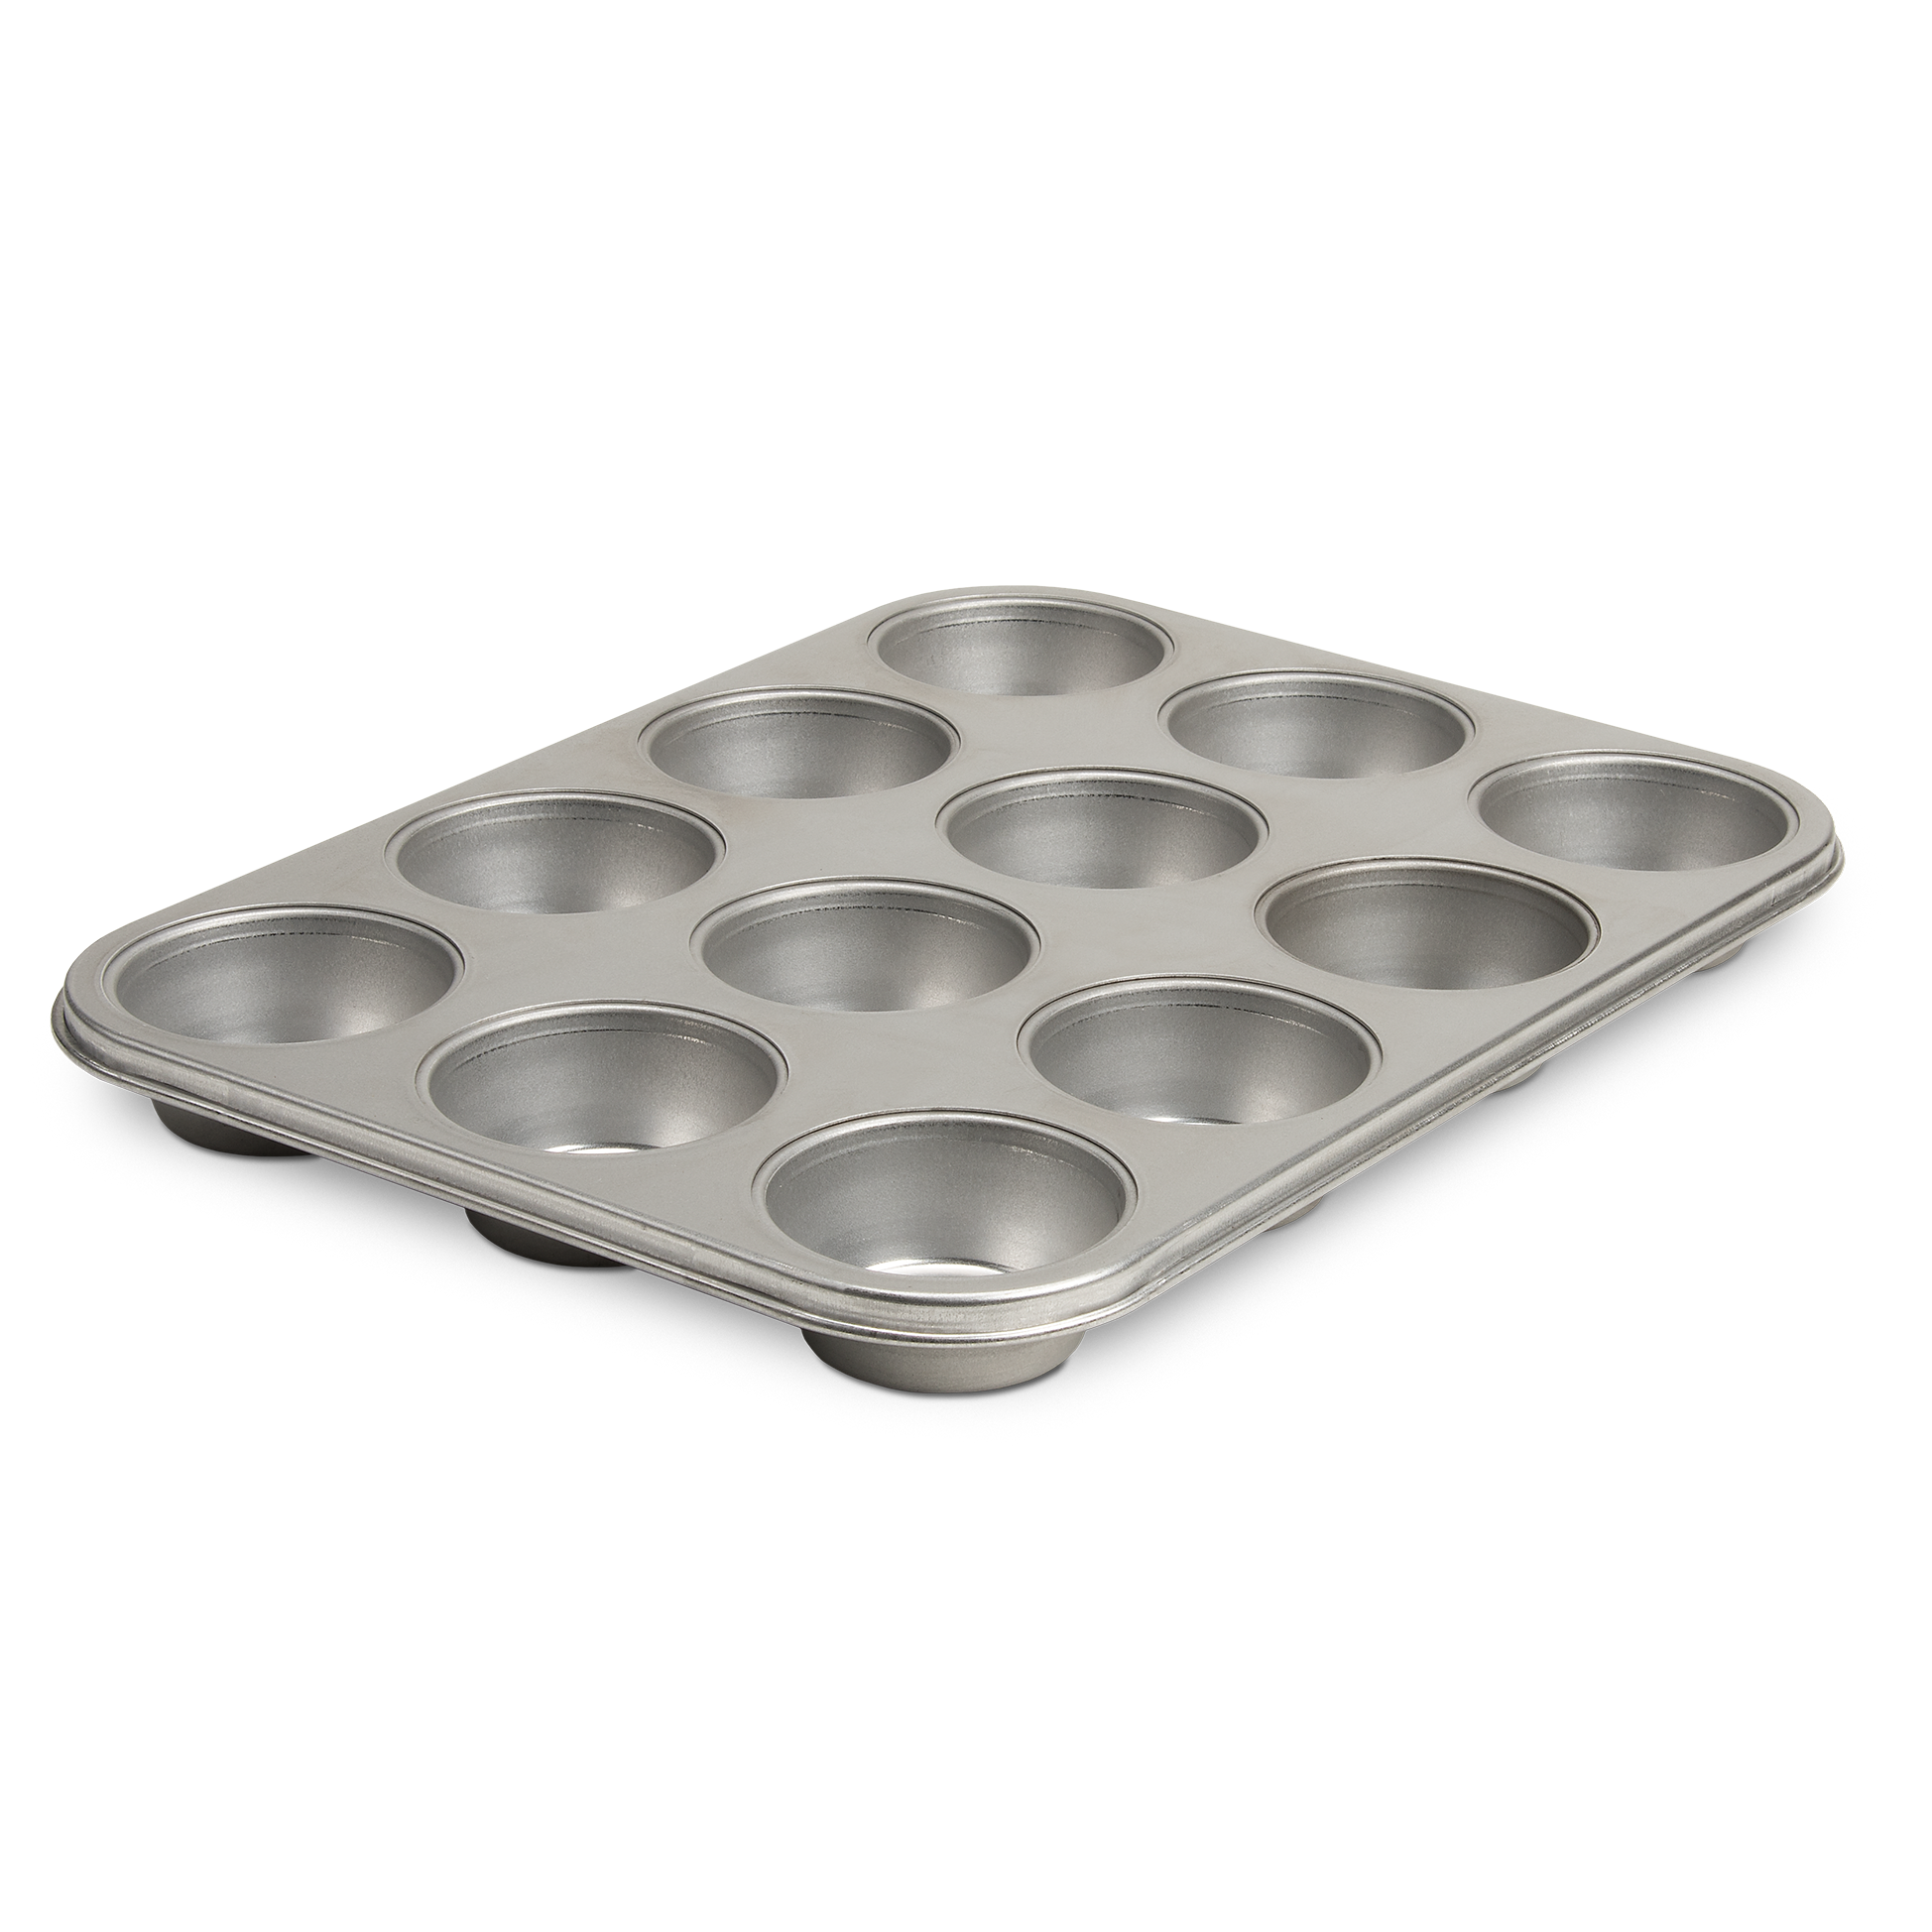 Product photo, 12 cup muffin pan, 3/4 perspective